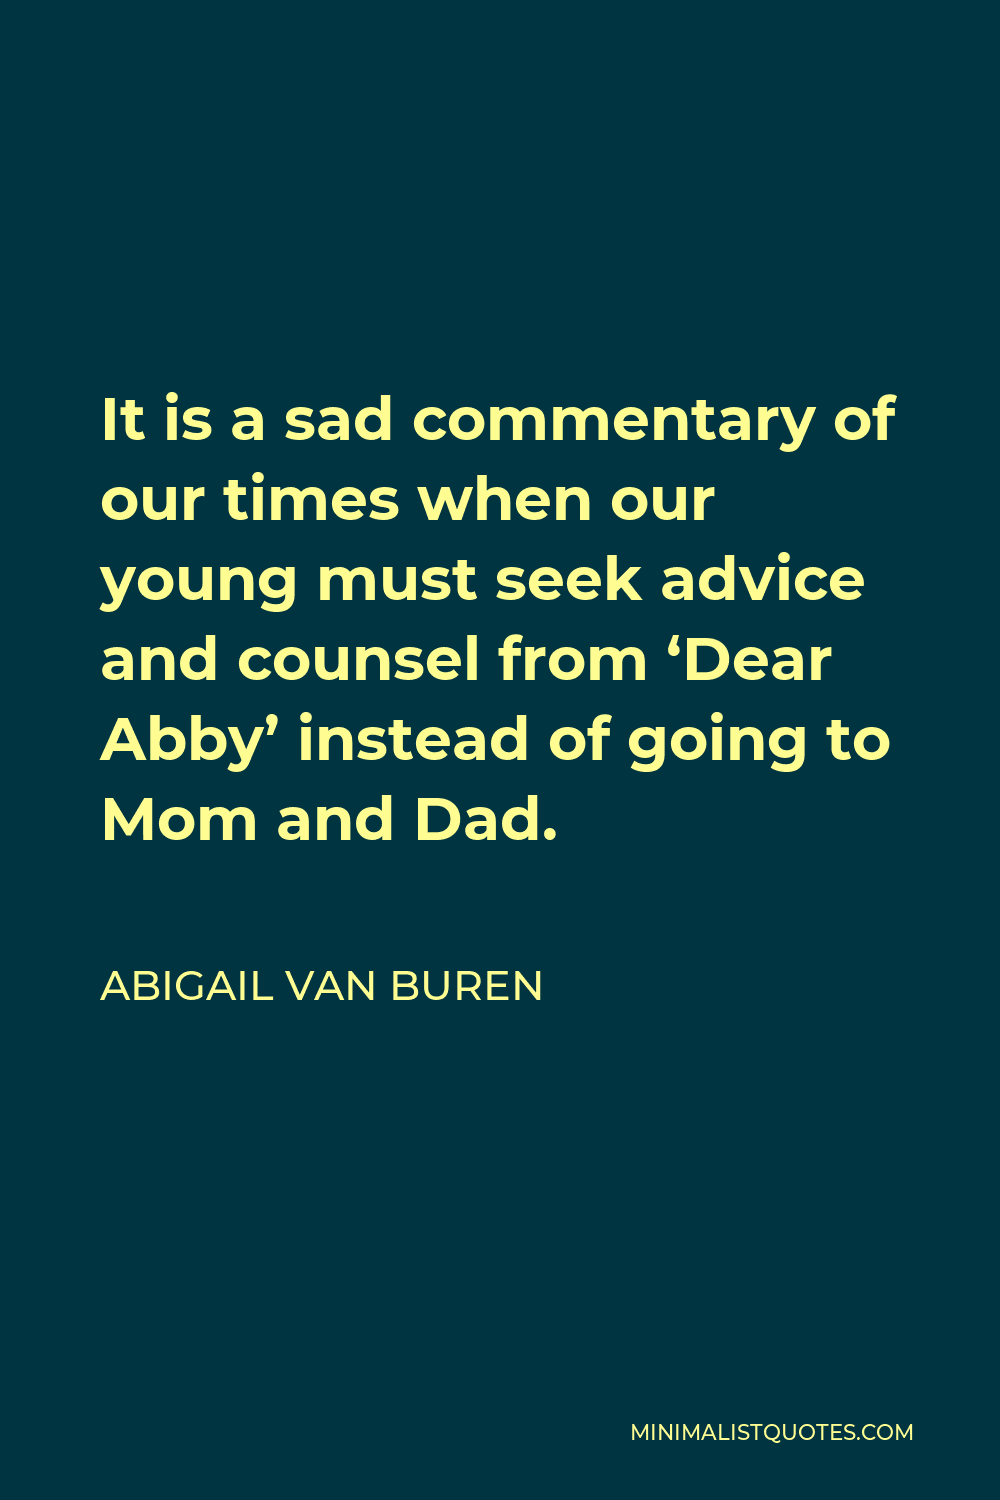 Abigail Van Buren Quote - It is a sad commentary of our times when our young must seek advice and counsel from ‘Dear Abby’ instead of going to Mom and Dad.